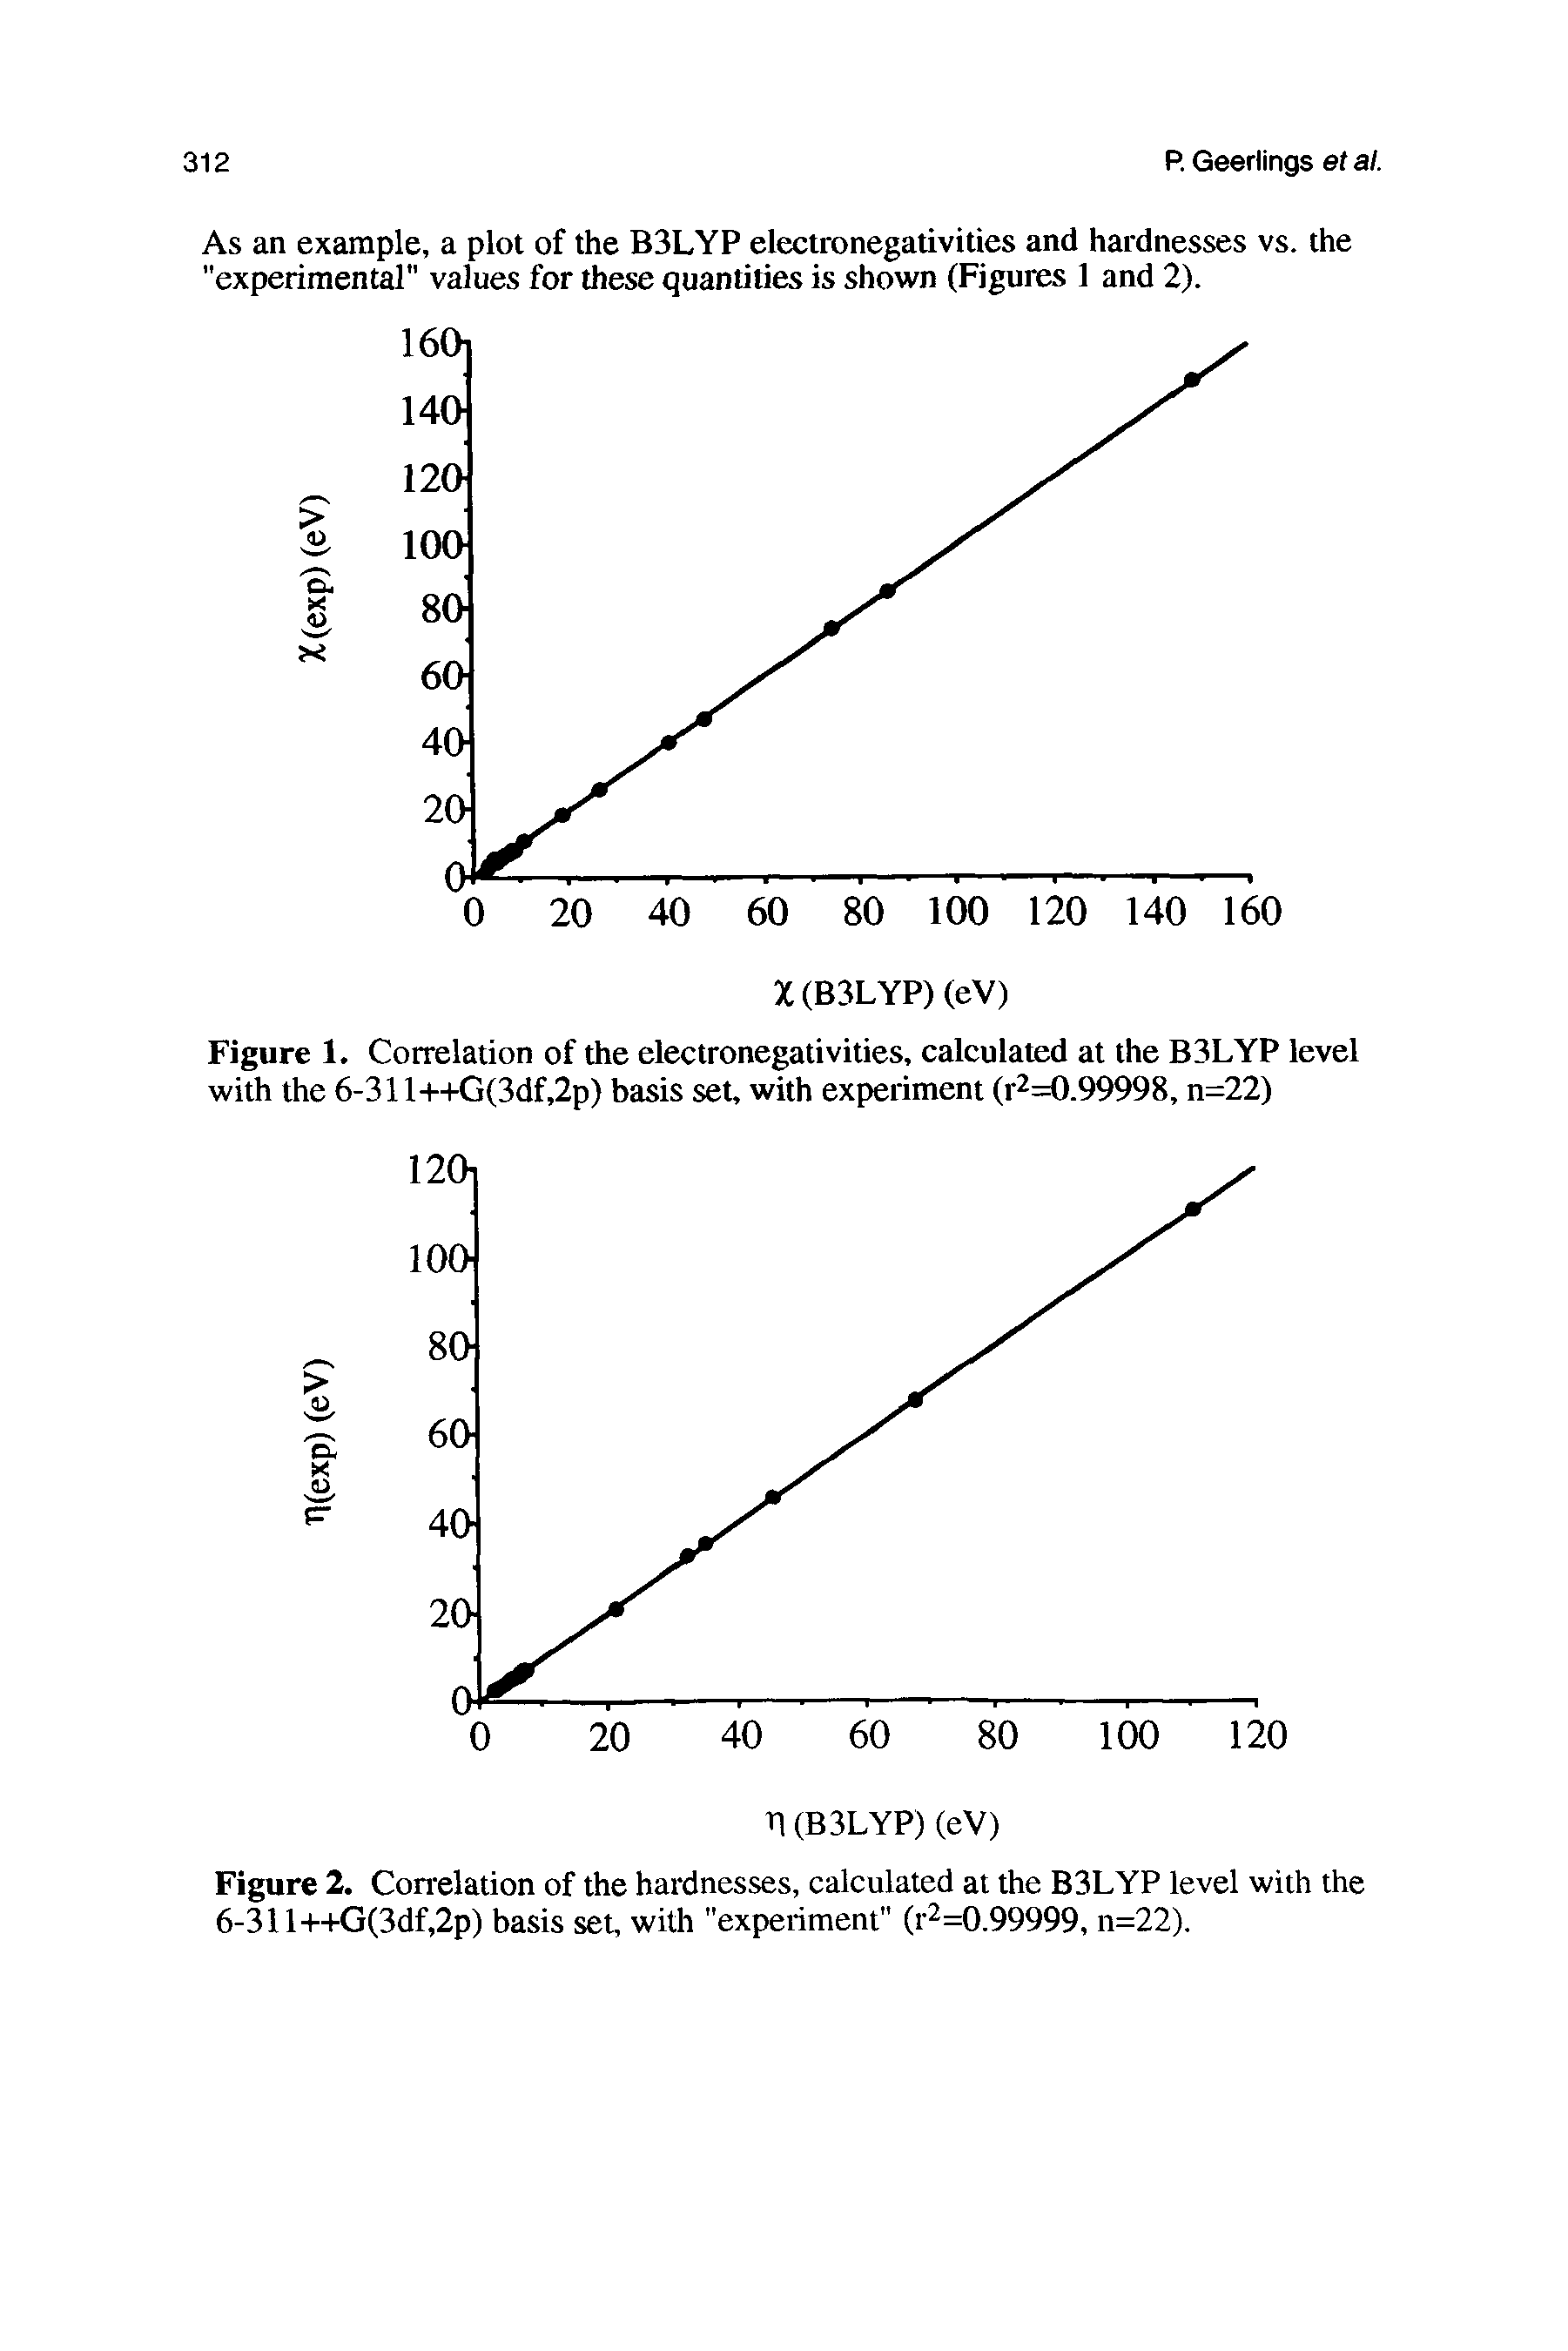 Figure 1. Correlation of the electronegativities, calculated at the B3LYP level with the 6-311++G(3df,2p) basis set, with experiment (r2=0.99998, n=22)...